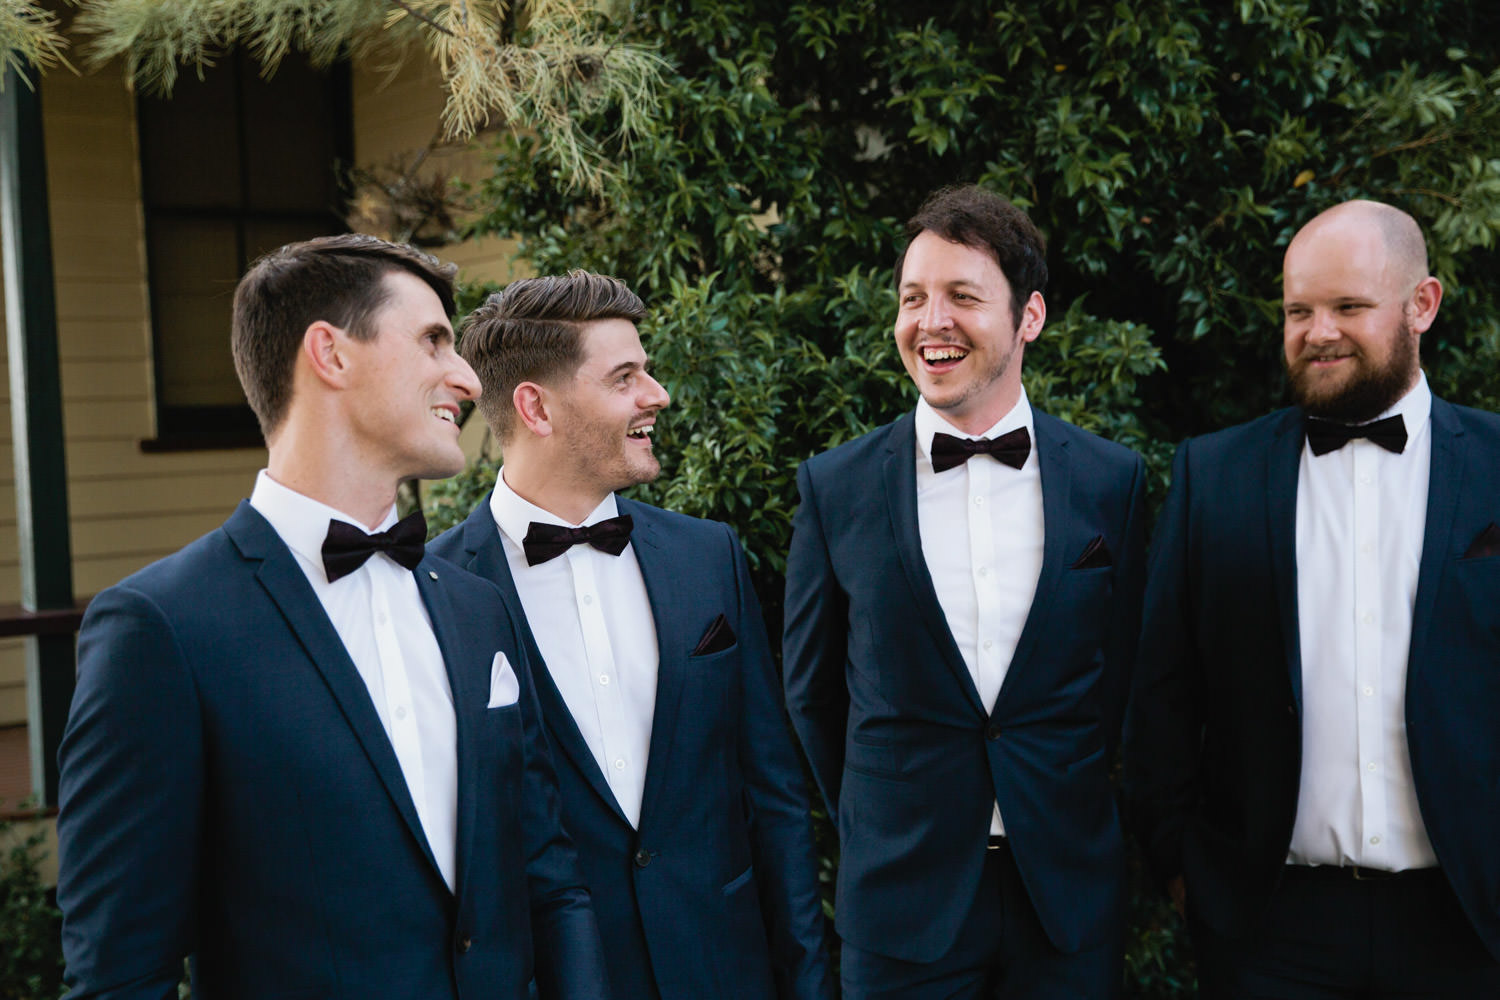 Groomsmen-waiting-for-ceremony-natural, fun, romantic-wedding-photography at Spicers-hiddenvale-QuinceandMulberryStudios